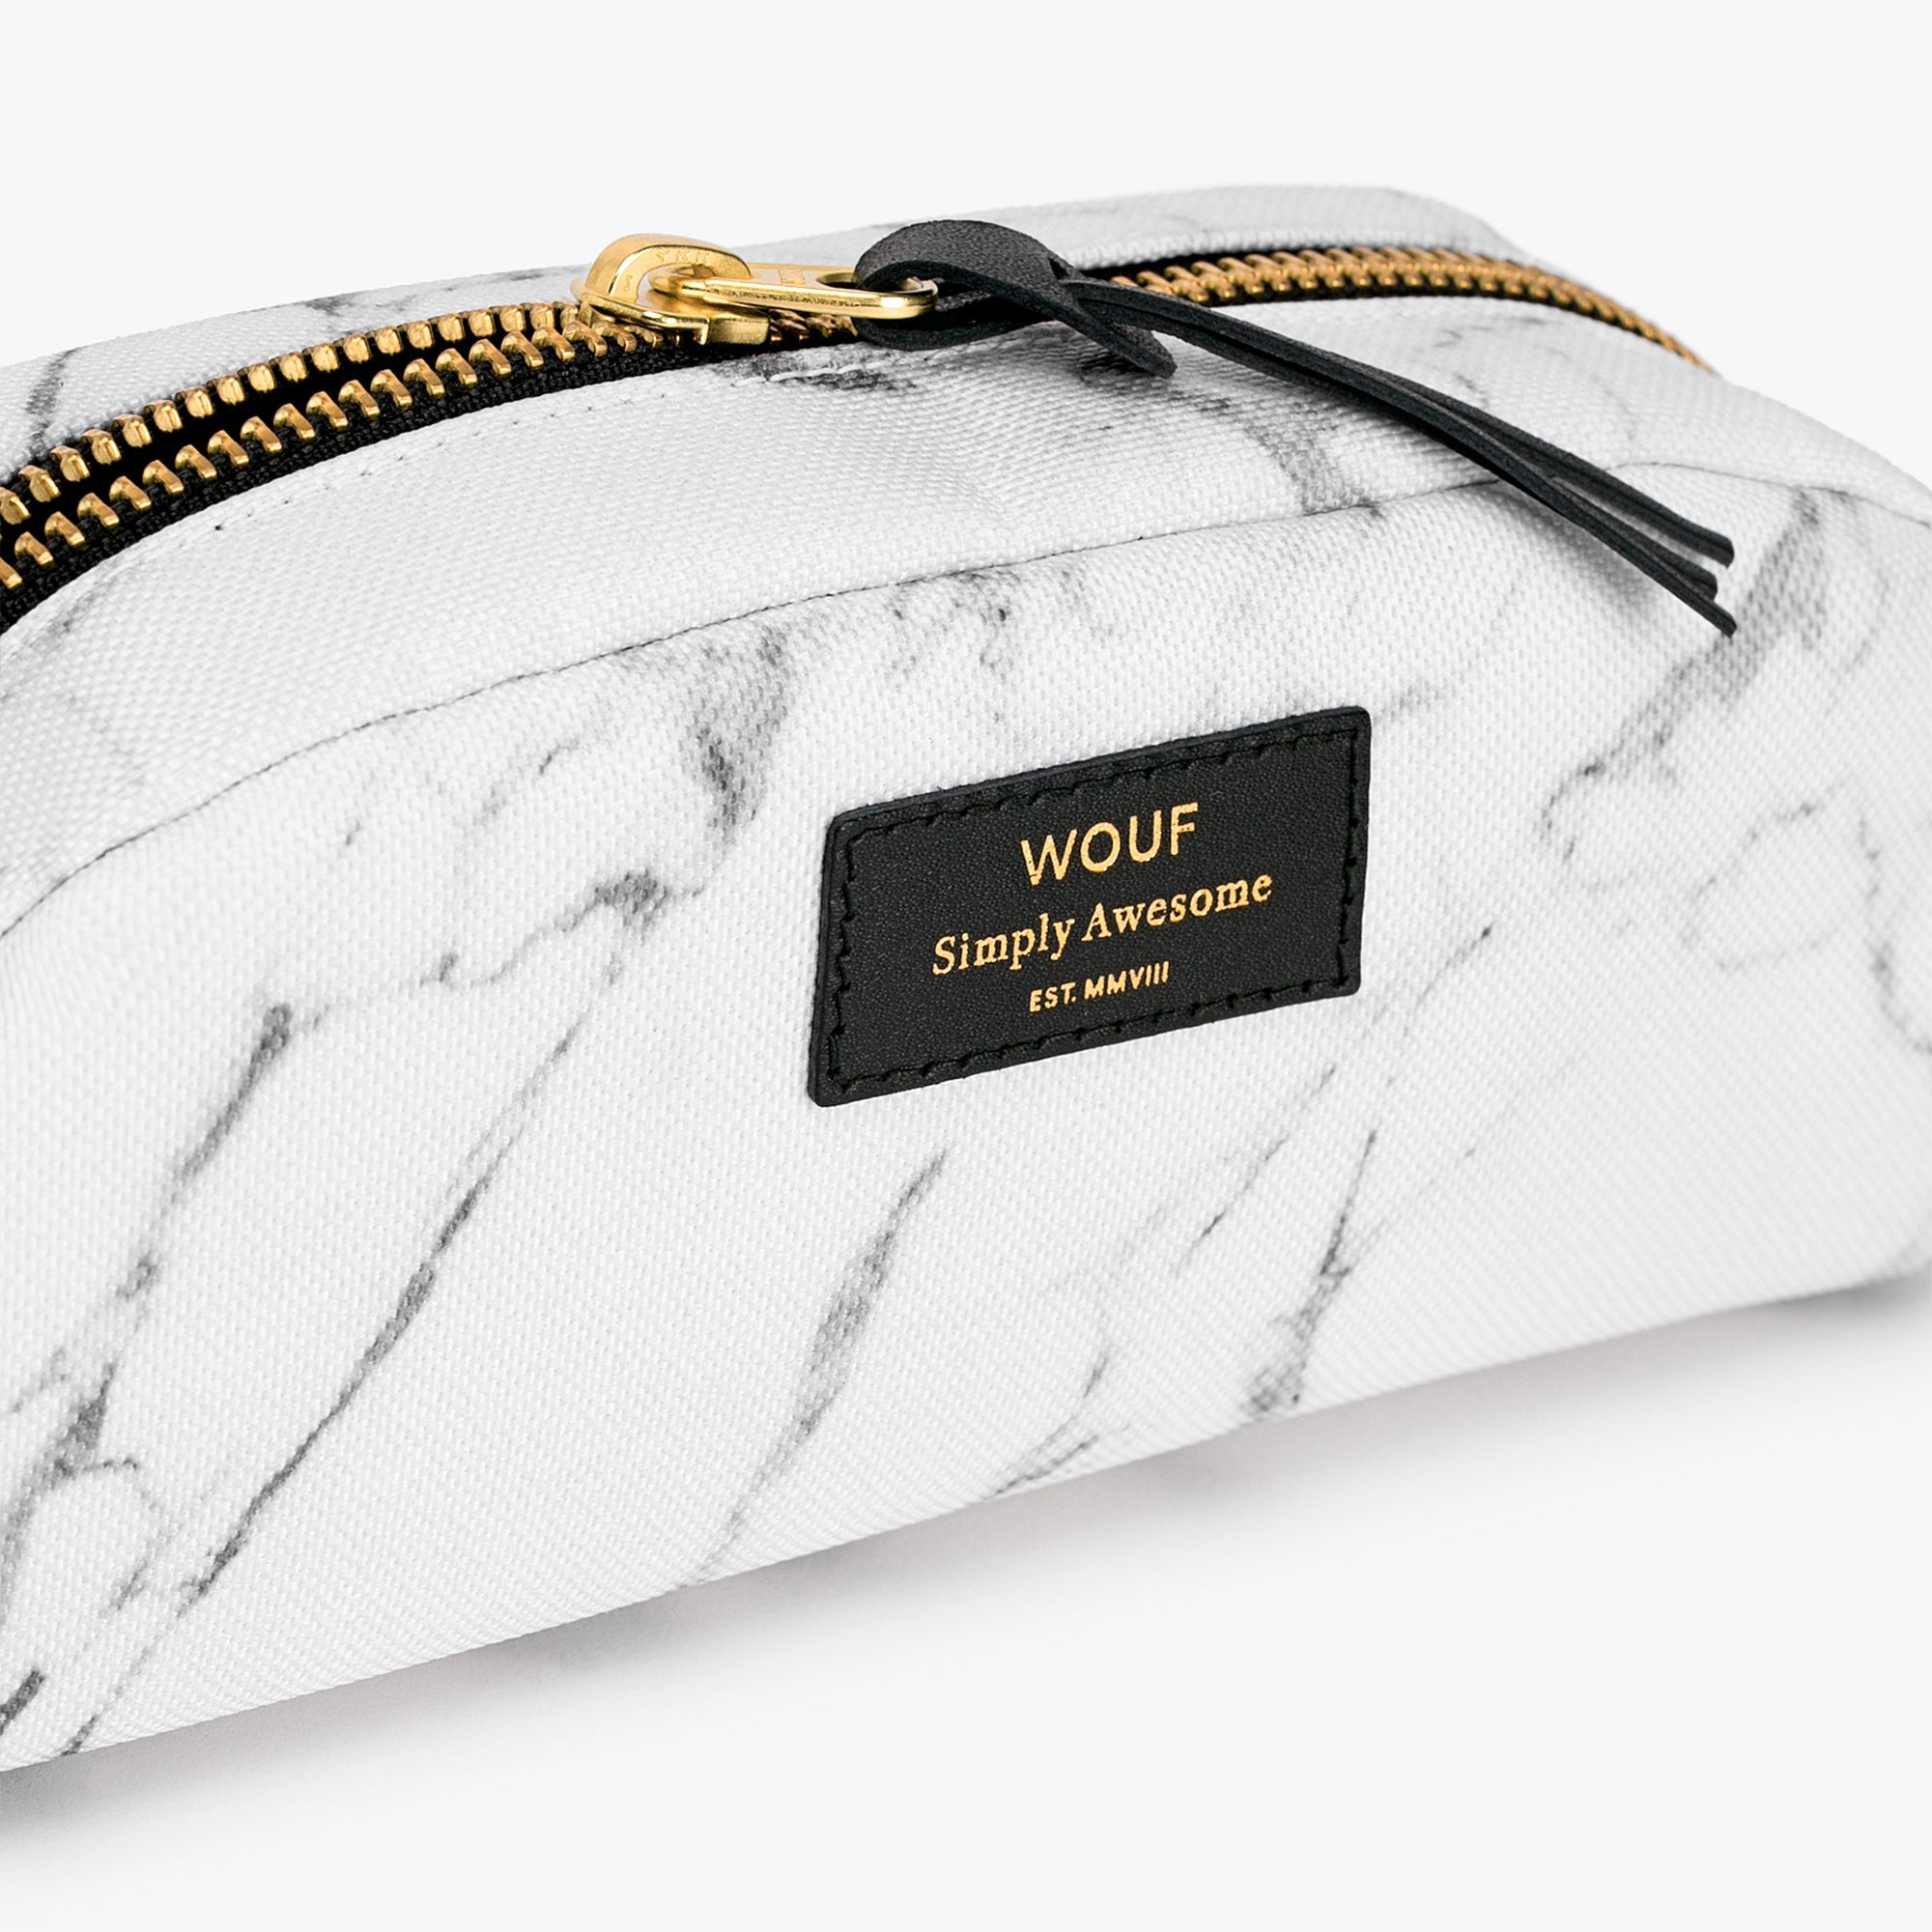 Petite trousse beauté White marble by WOUF